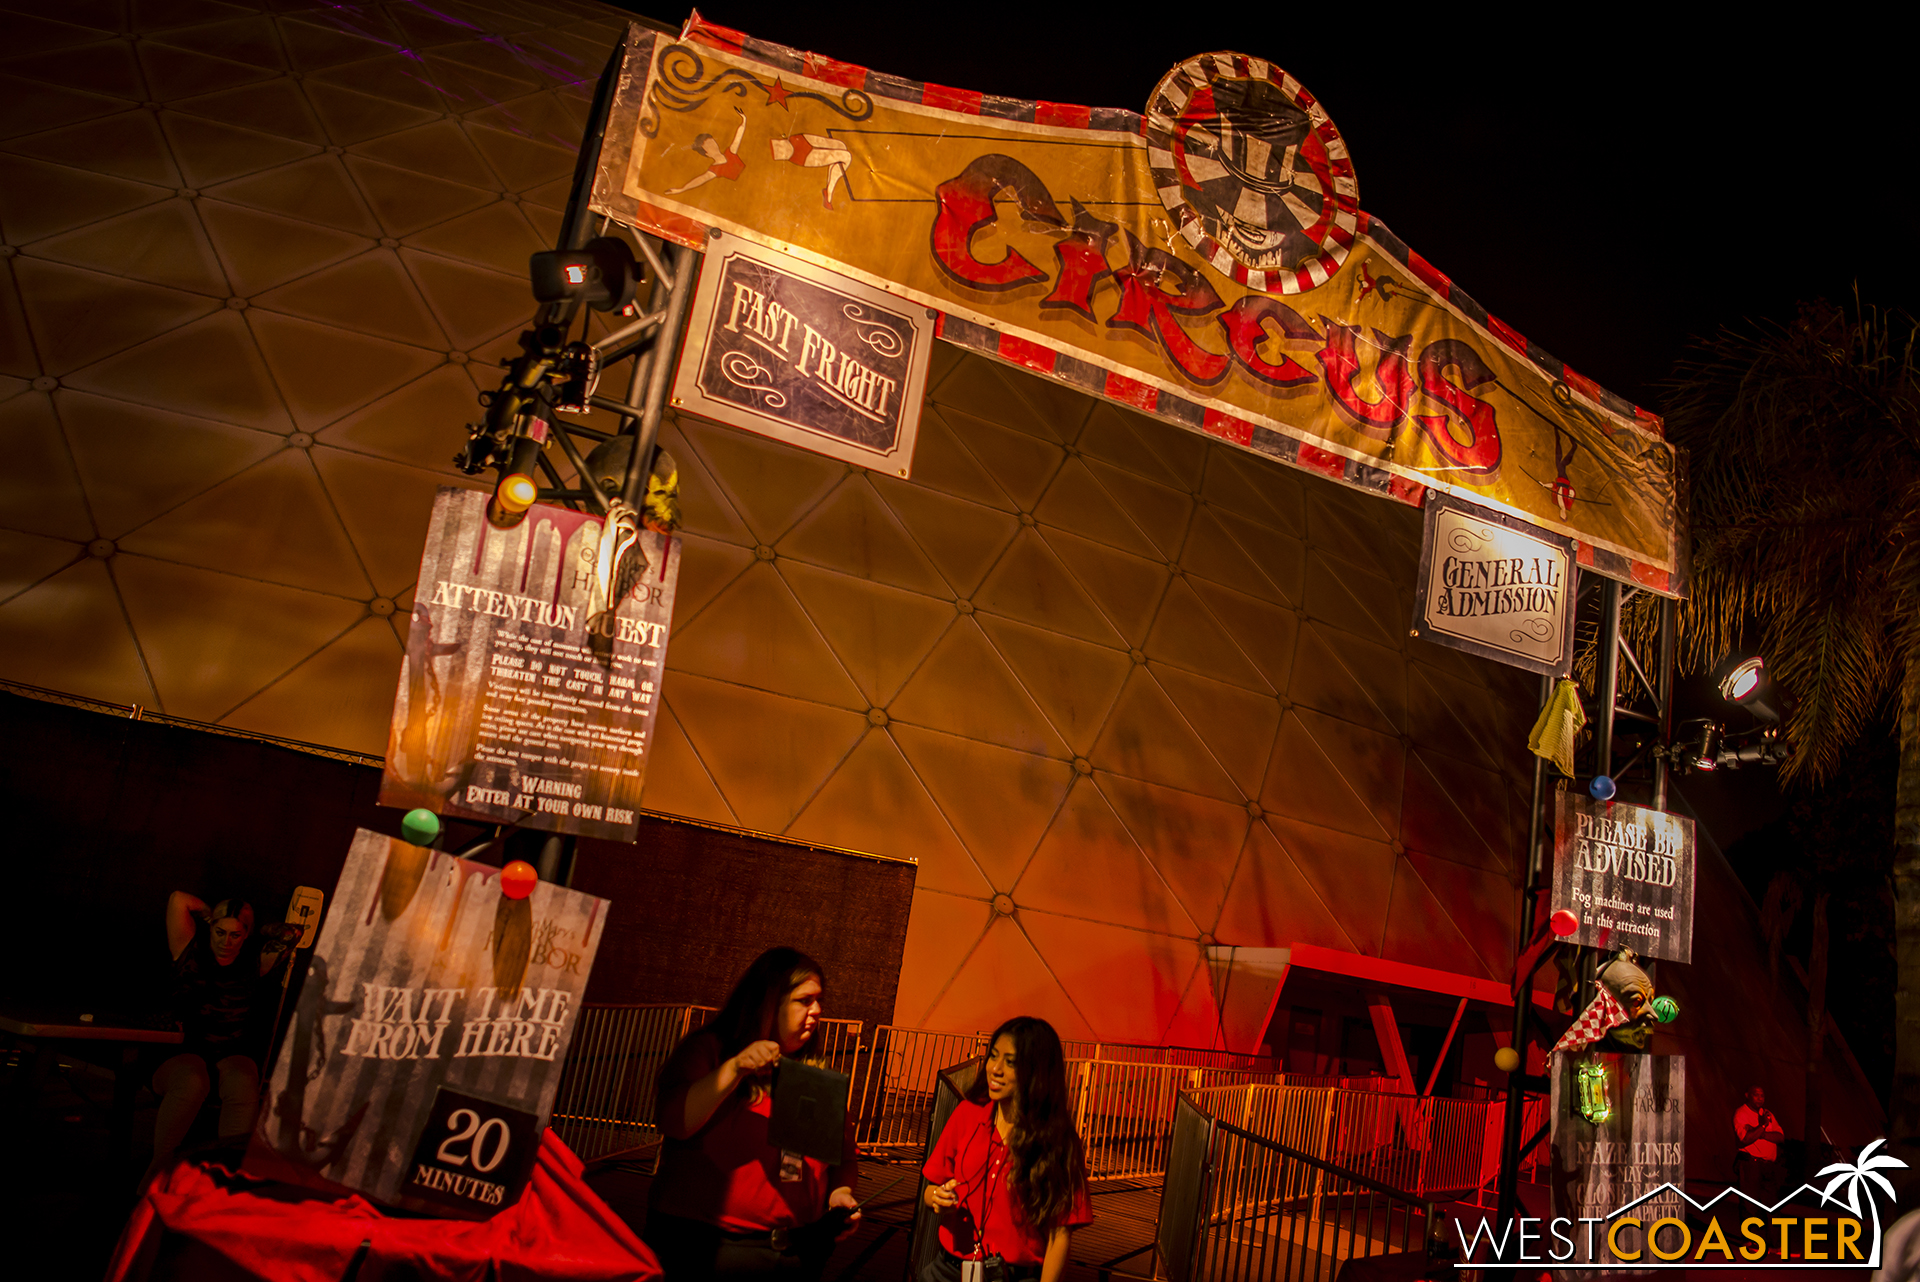  Circus time!&nbsp; Lets go inside! 